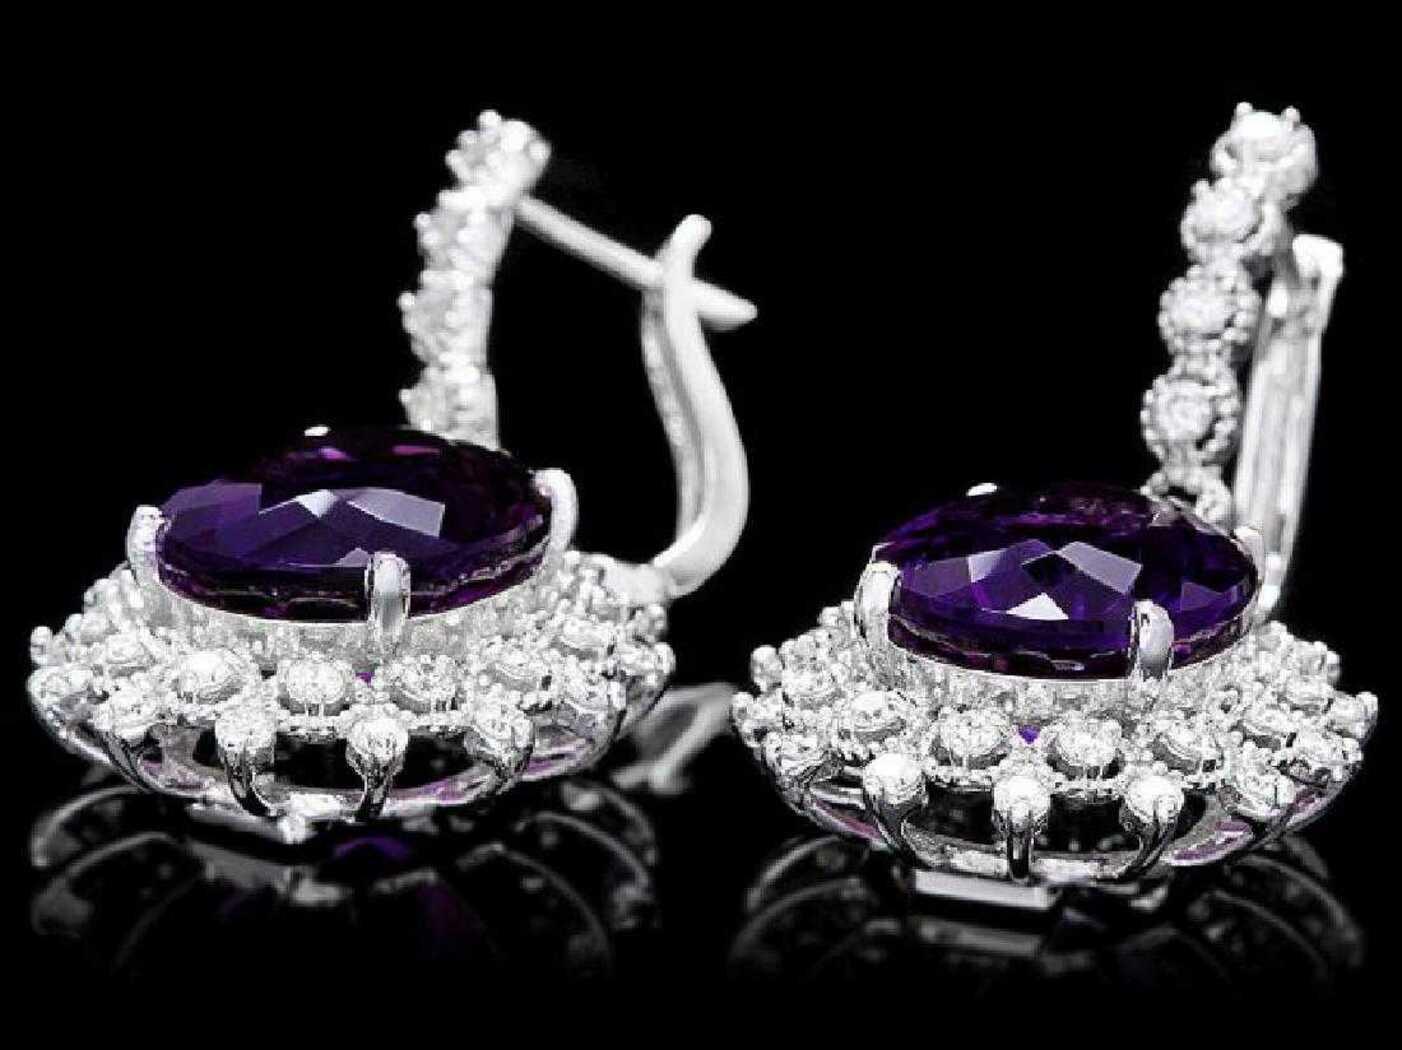 14K White Gold 12.50ct Amethyst and 1.65ct Diamond Earrings